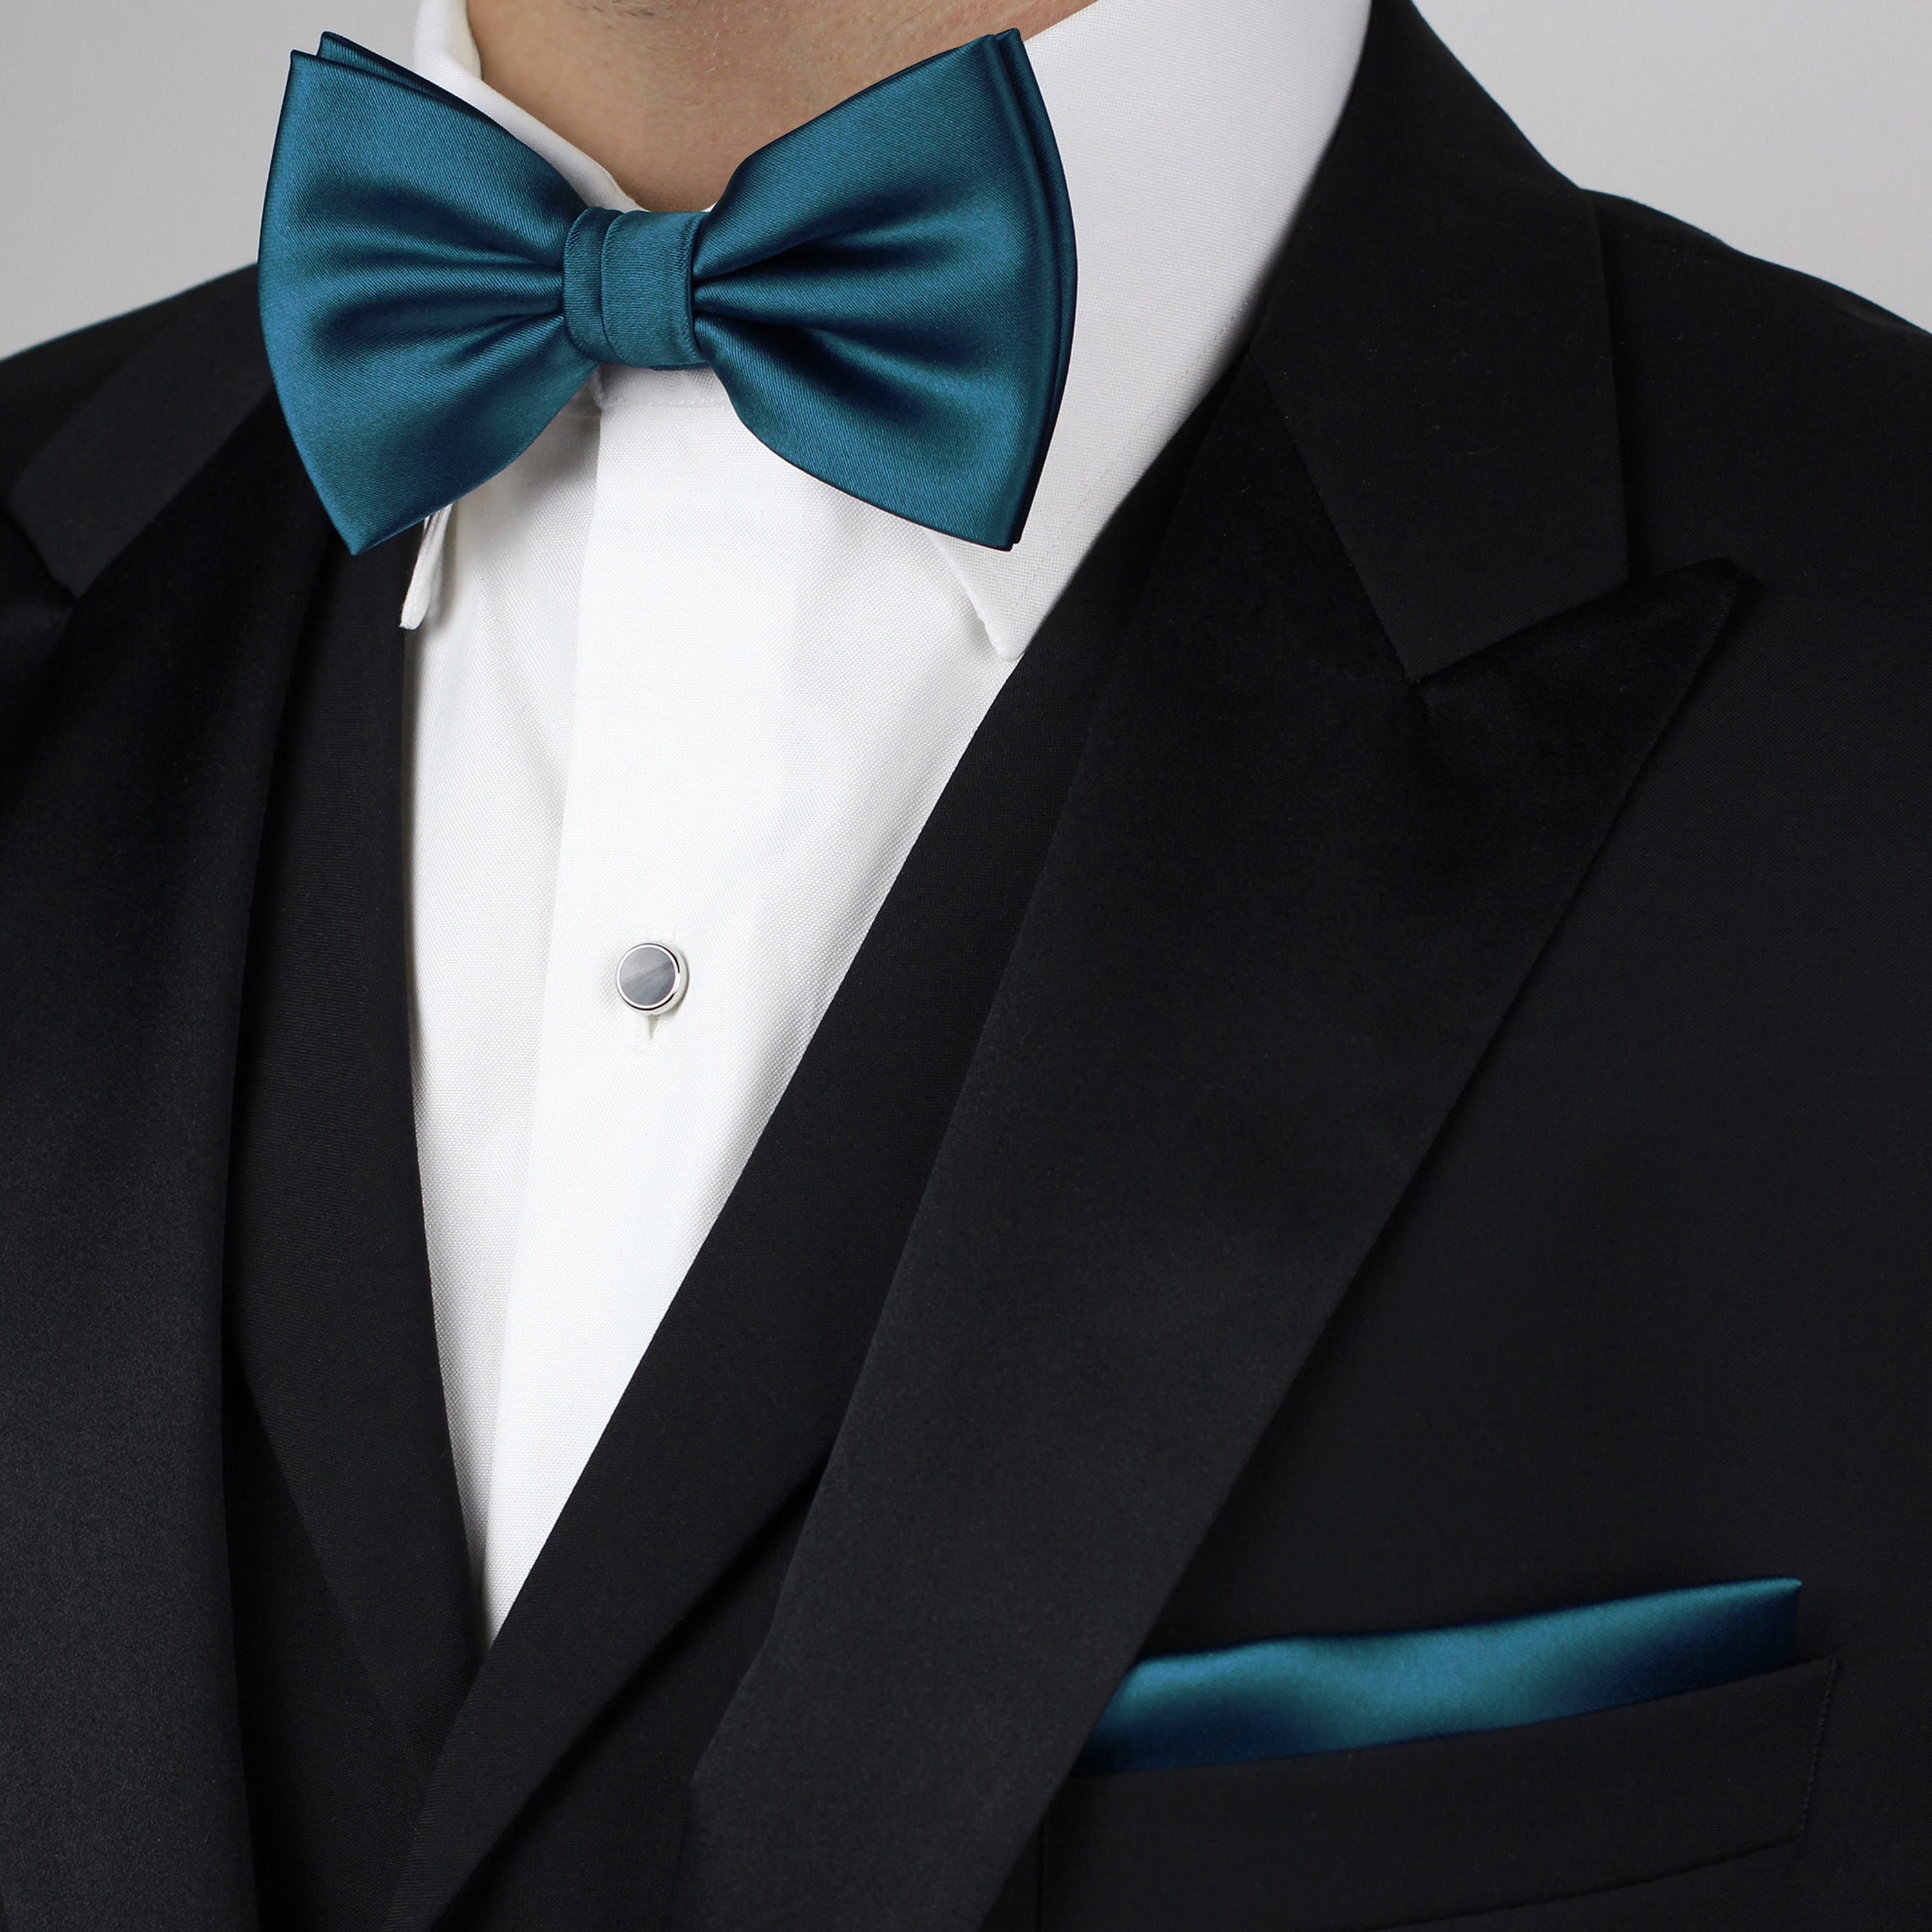 Peacock Bow Tie Set Men's Bow Ties and Pocket Square - Etsy